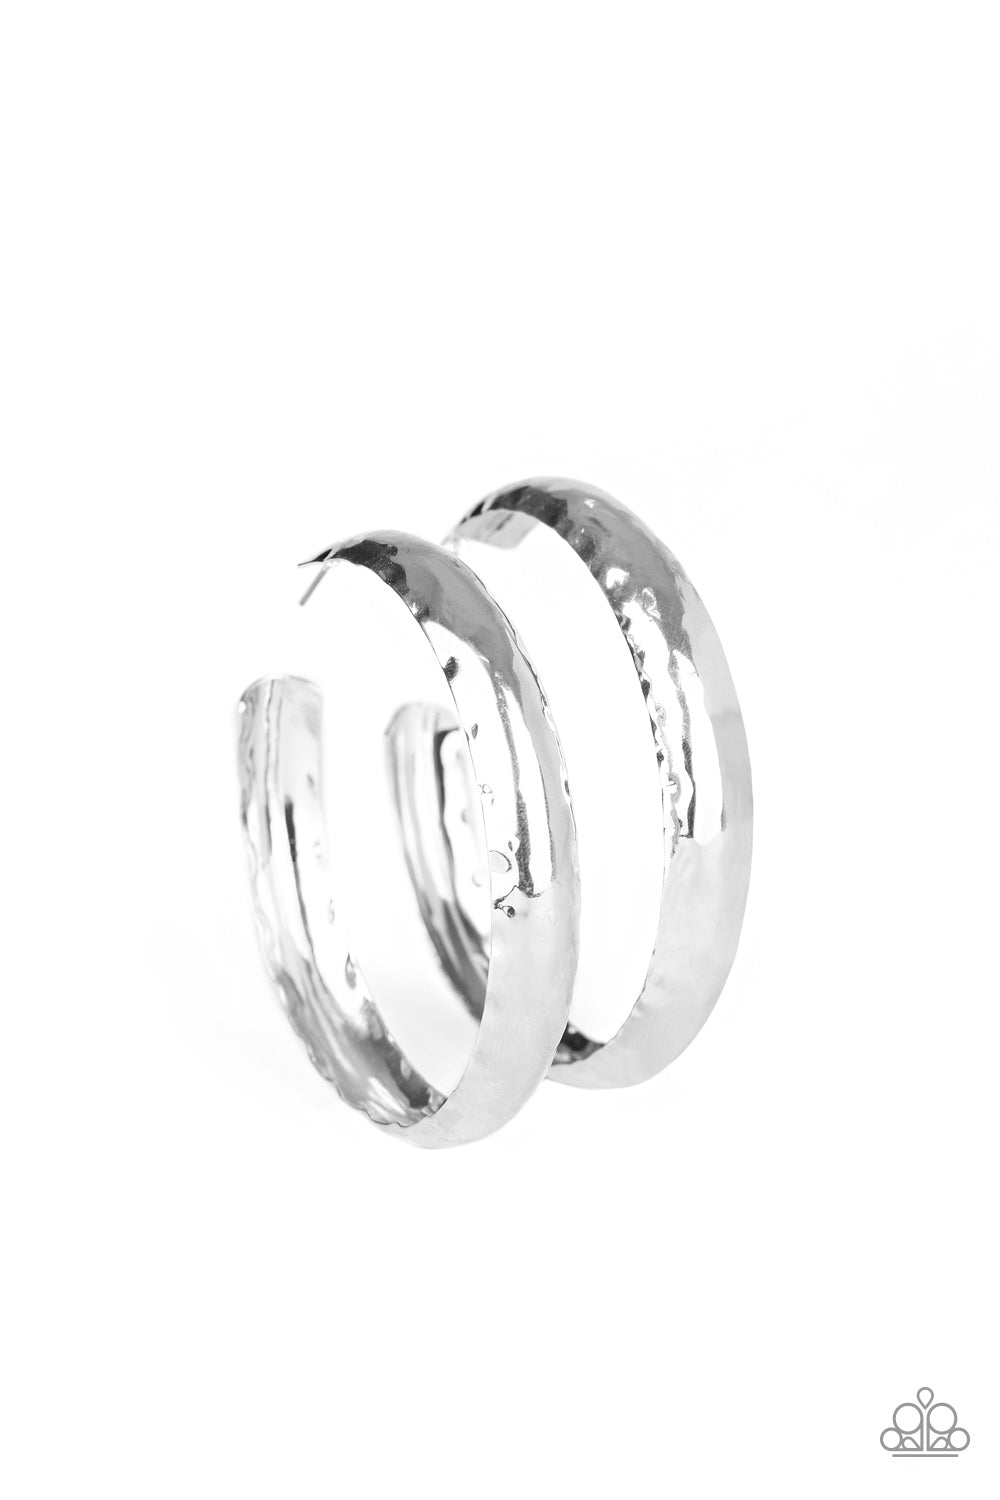 Check Out These Curves - Silver Hoops